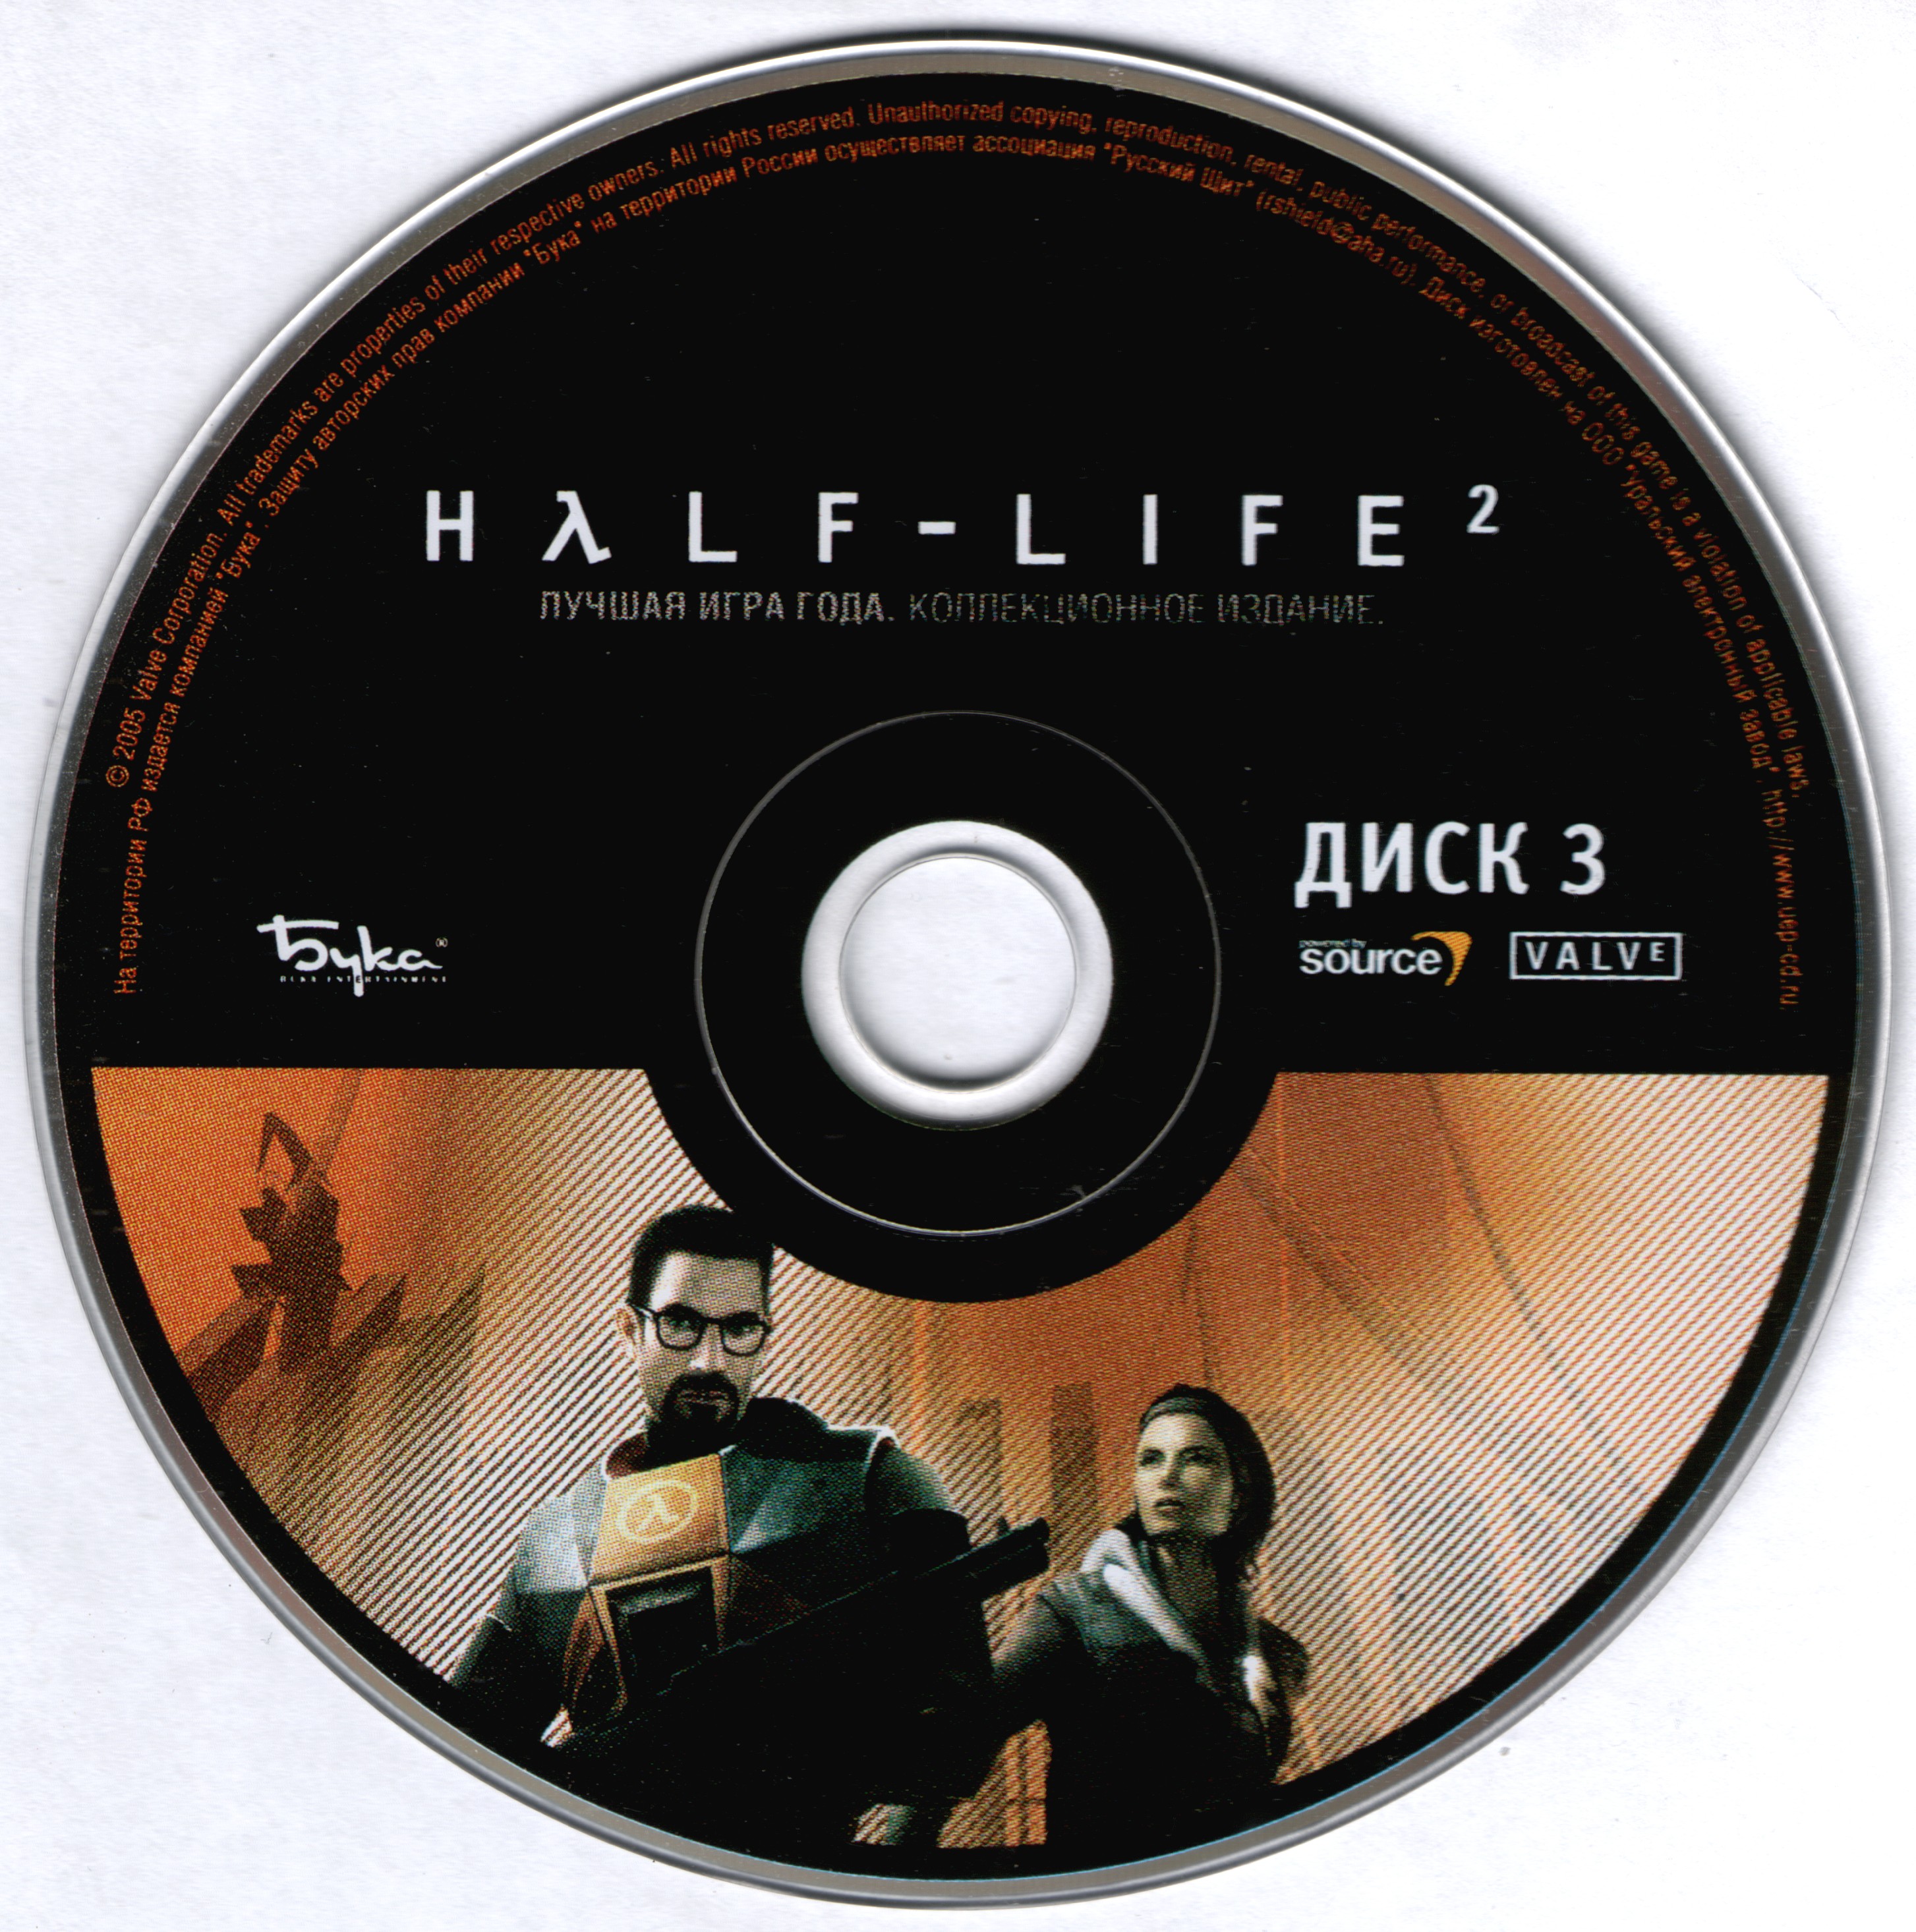 Please type in the cd key displayed on the half life cd case фото 13